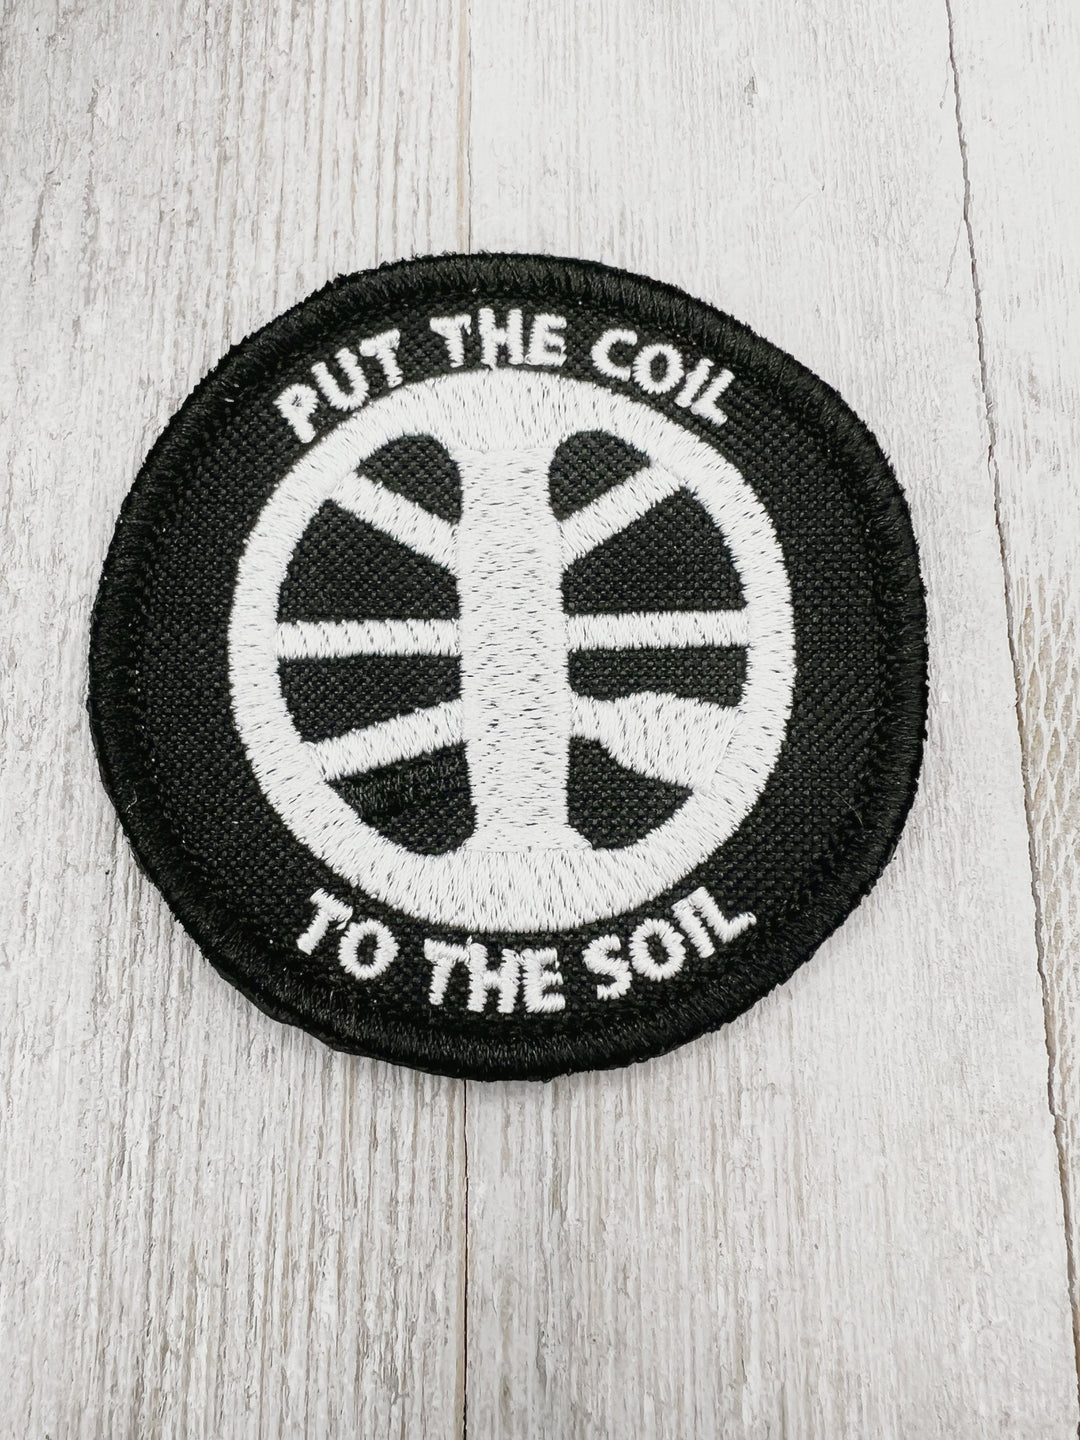 Put the Coil to the Soil Embroidery Patch